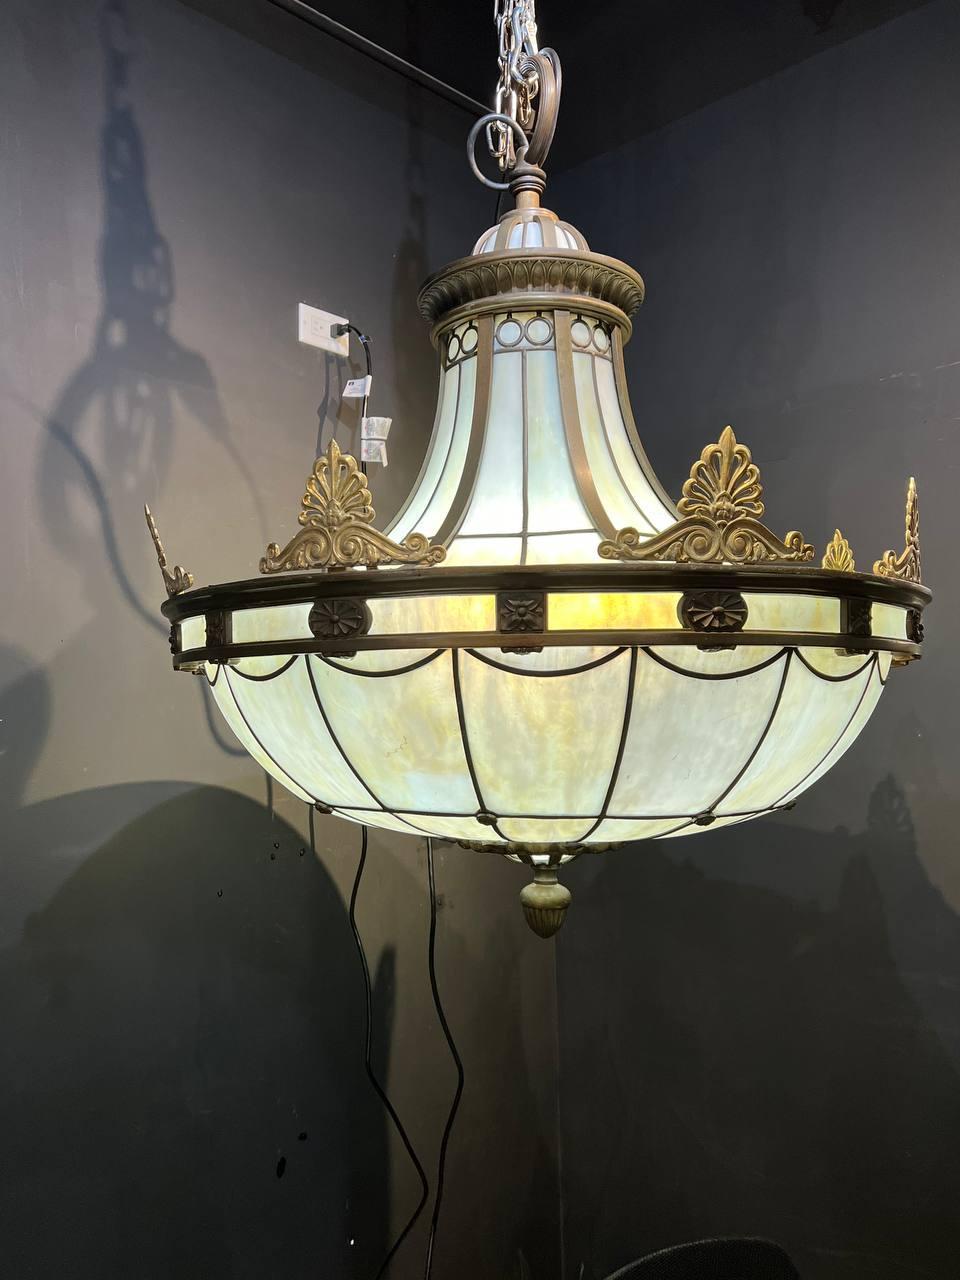 Neoclassical 1900s Caldwell Leaded Glass Light Fixture For Sale